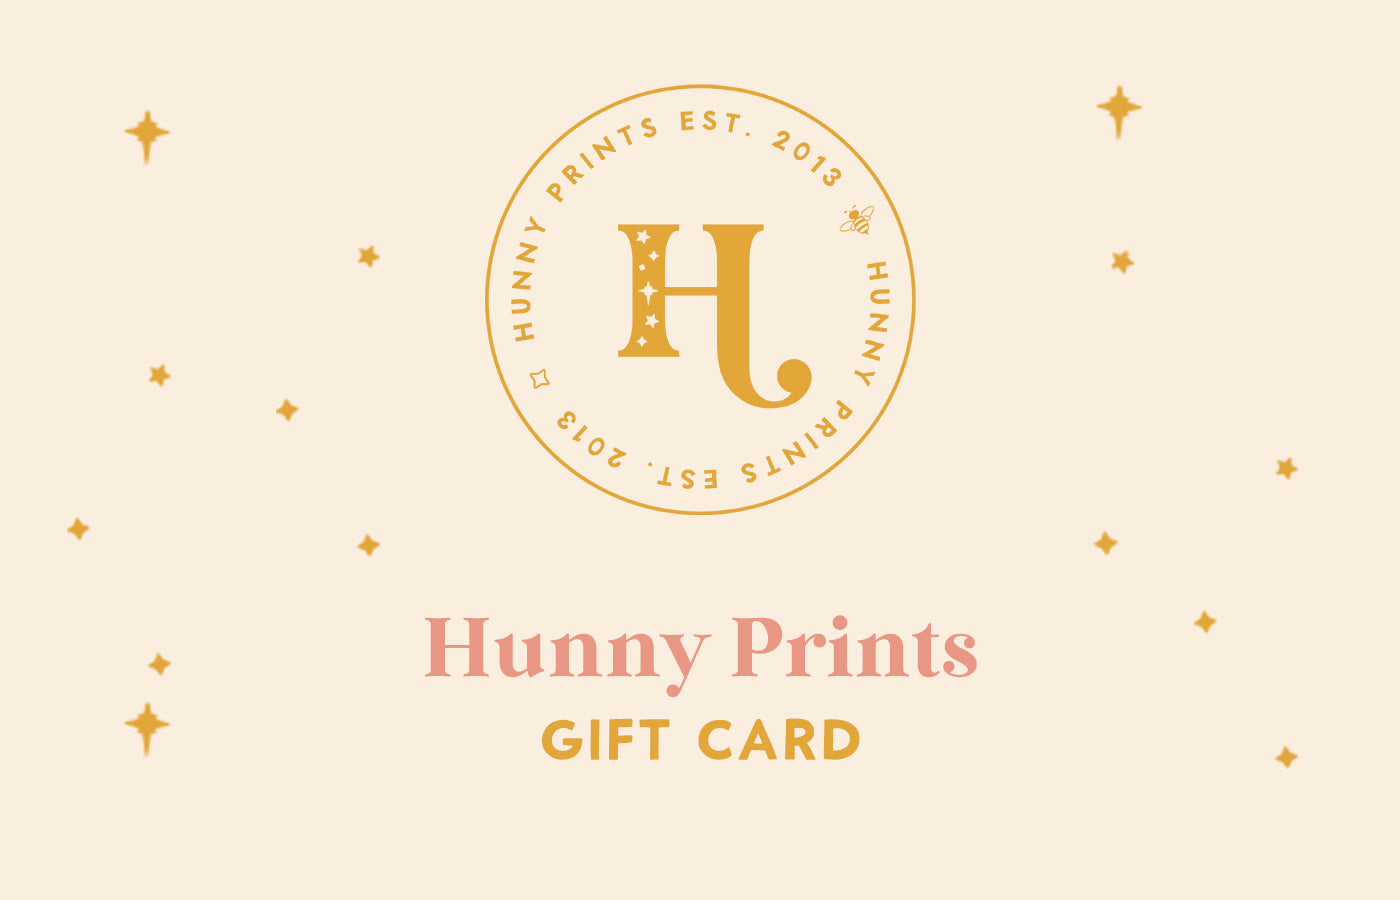 Hunny Prints® Gift Card: Email or Print at Home